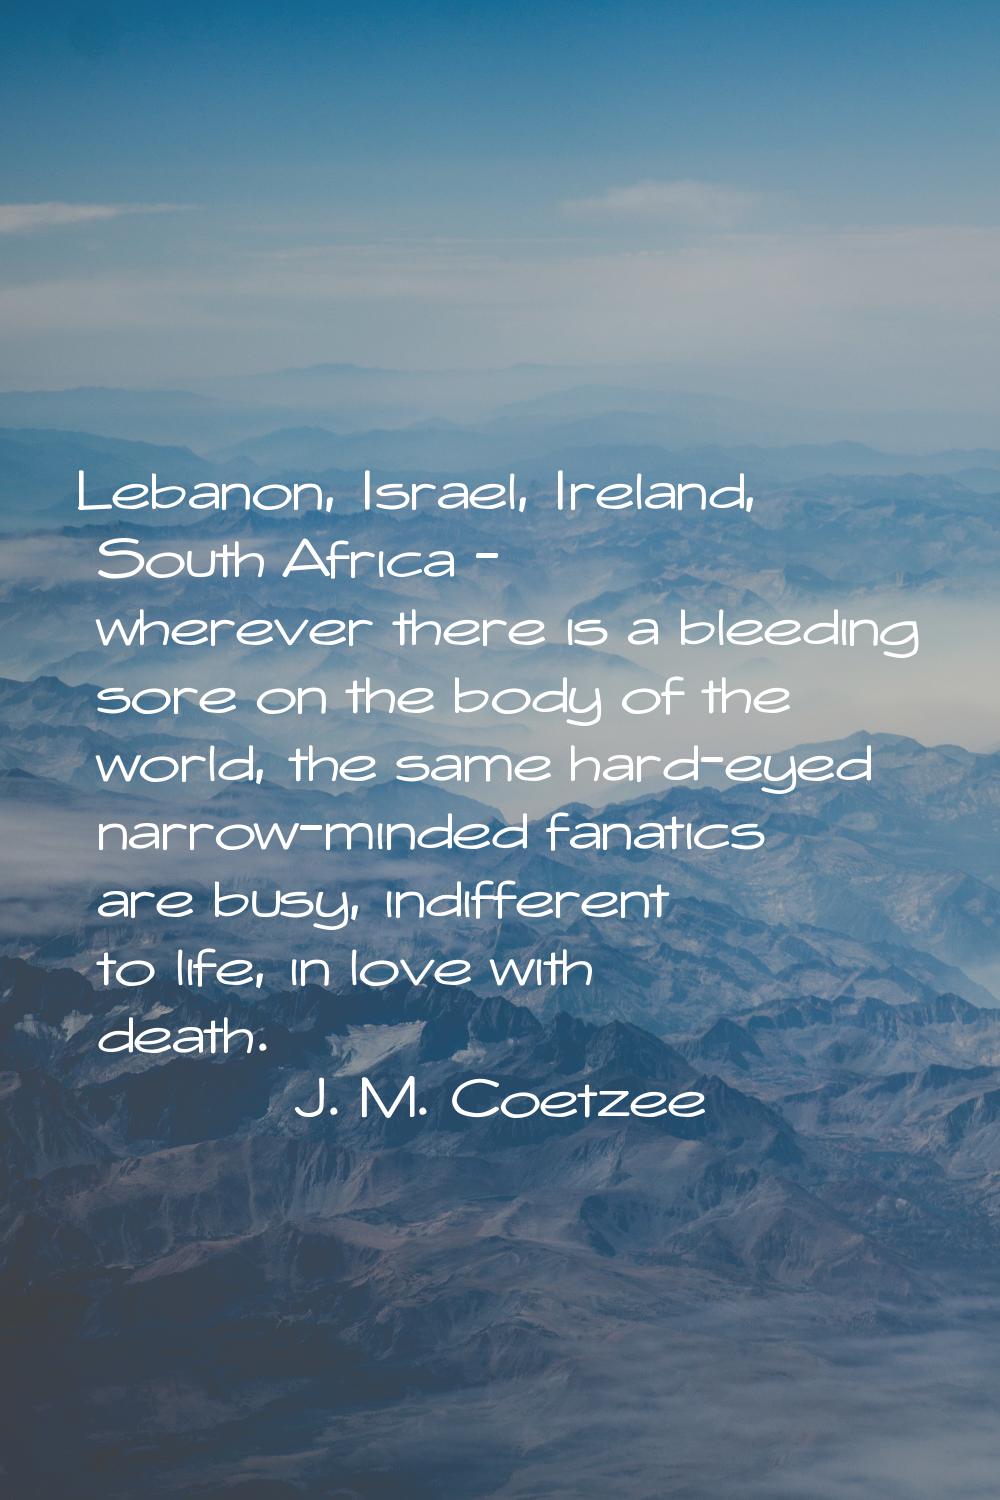 Lebanon, Israel, Ireland, South Africa - wherever there is a bleeding sore on the body of the world